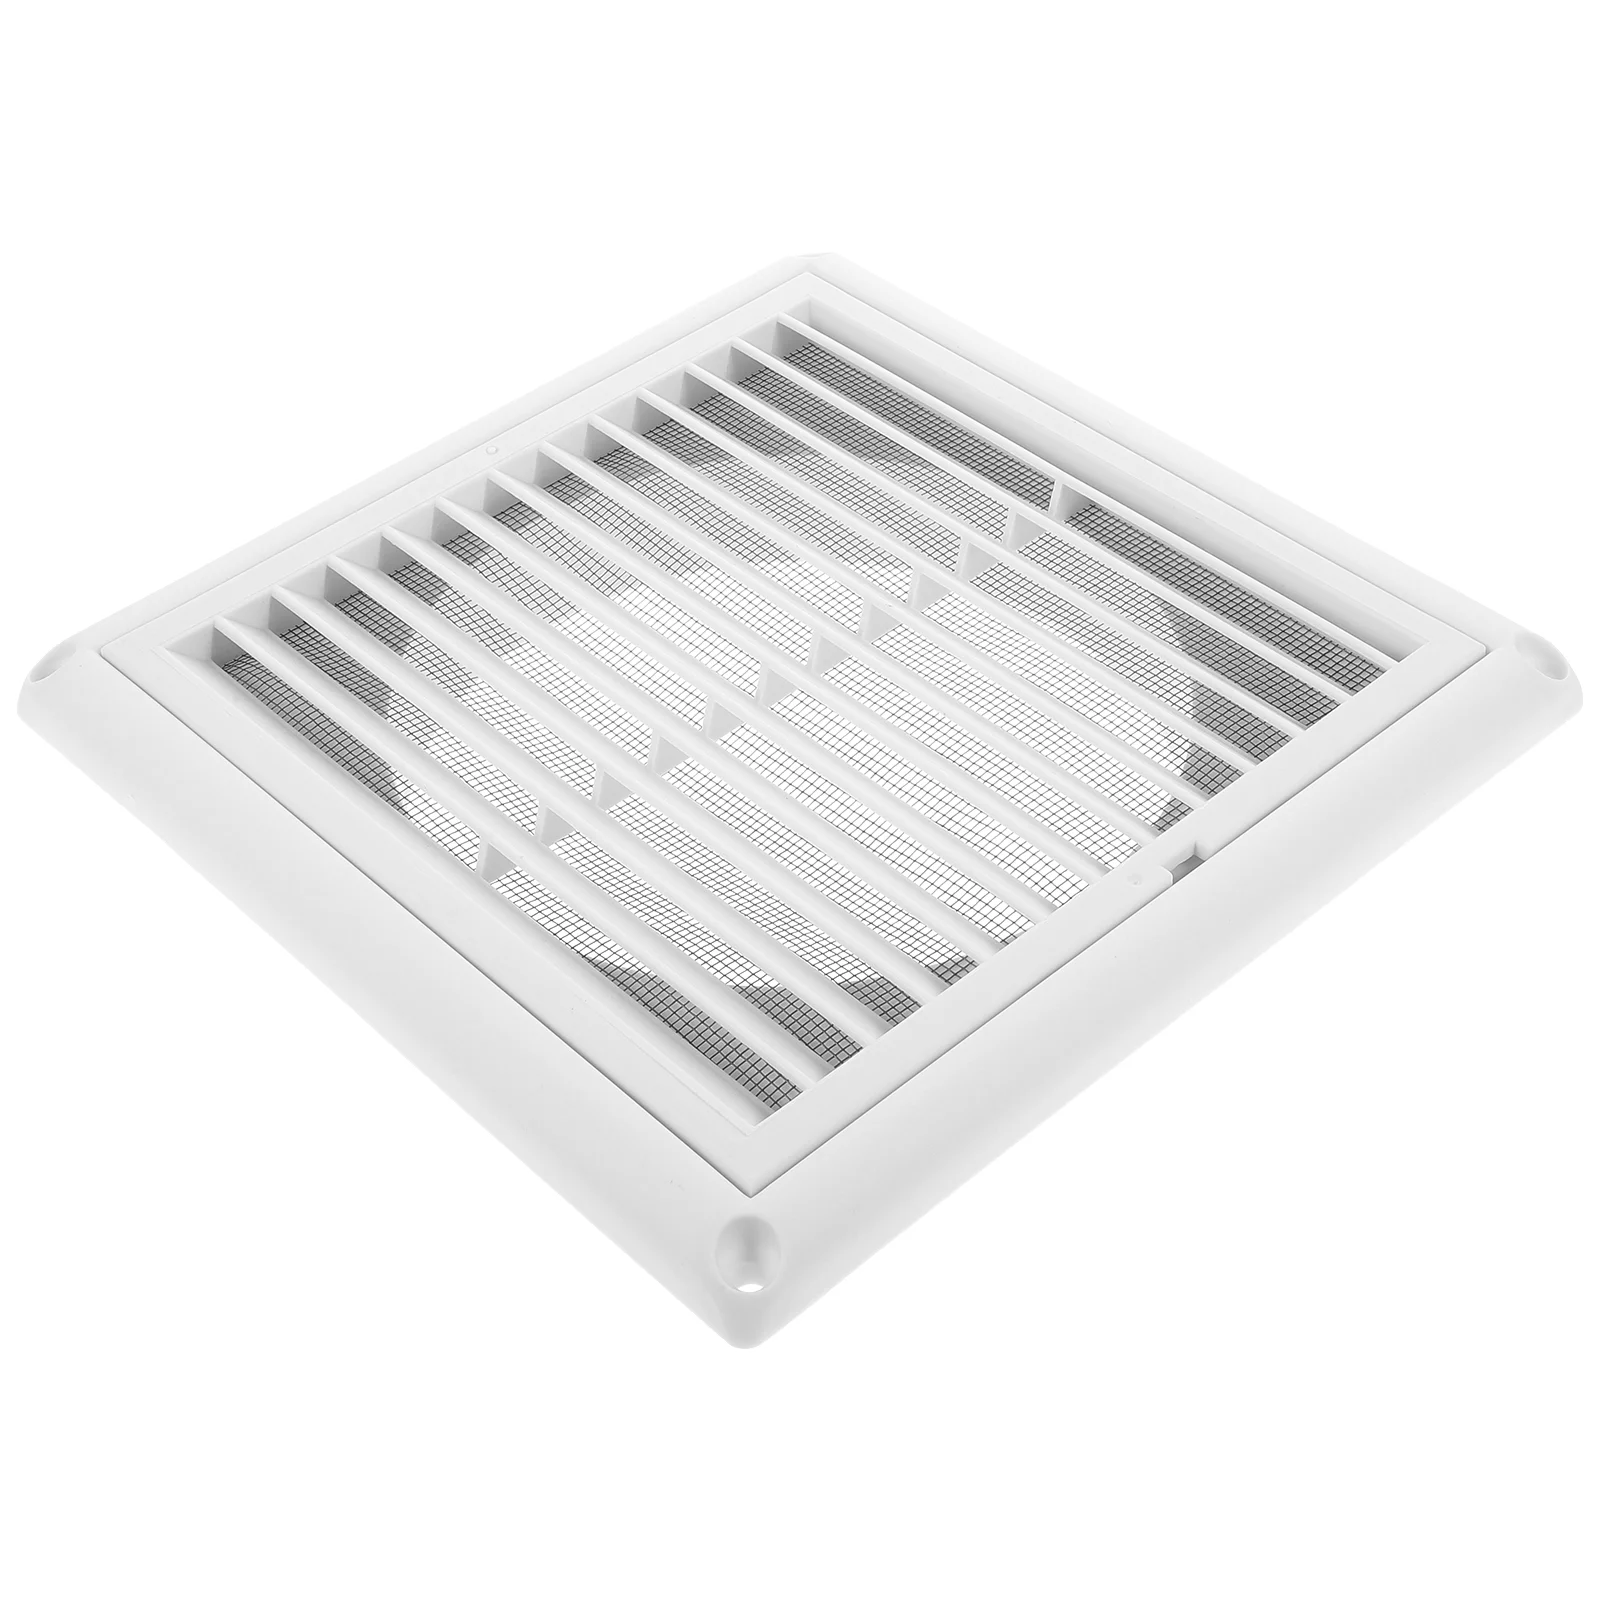 

Air Conditioner Outlet Return Vent Grille Adjustable Cover Anti-aging Wall Plastic Grilles Floor